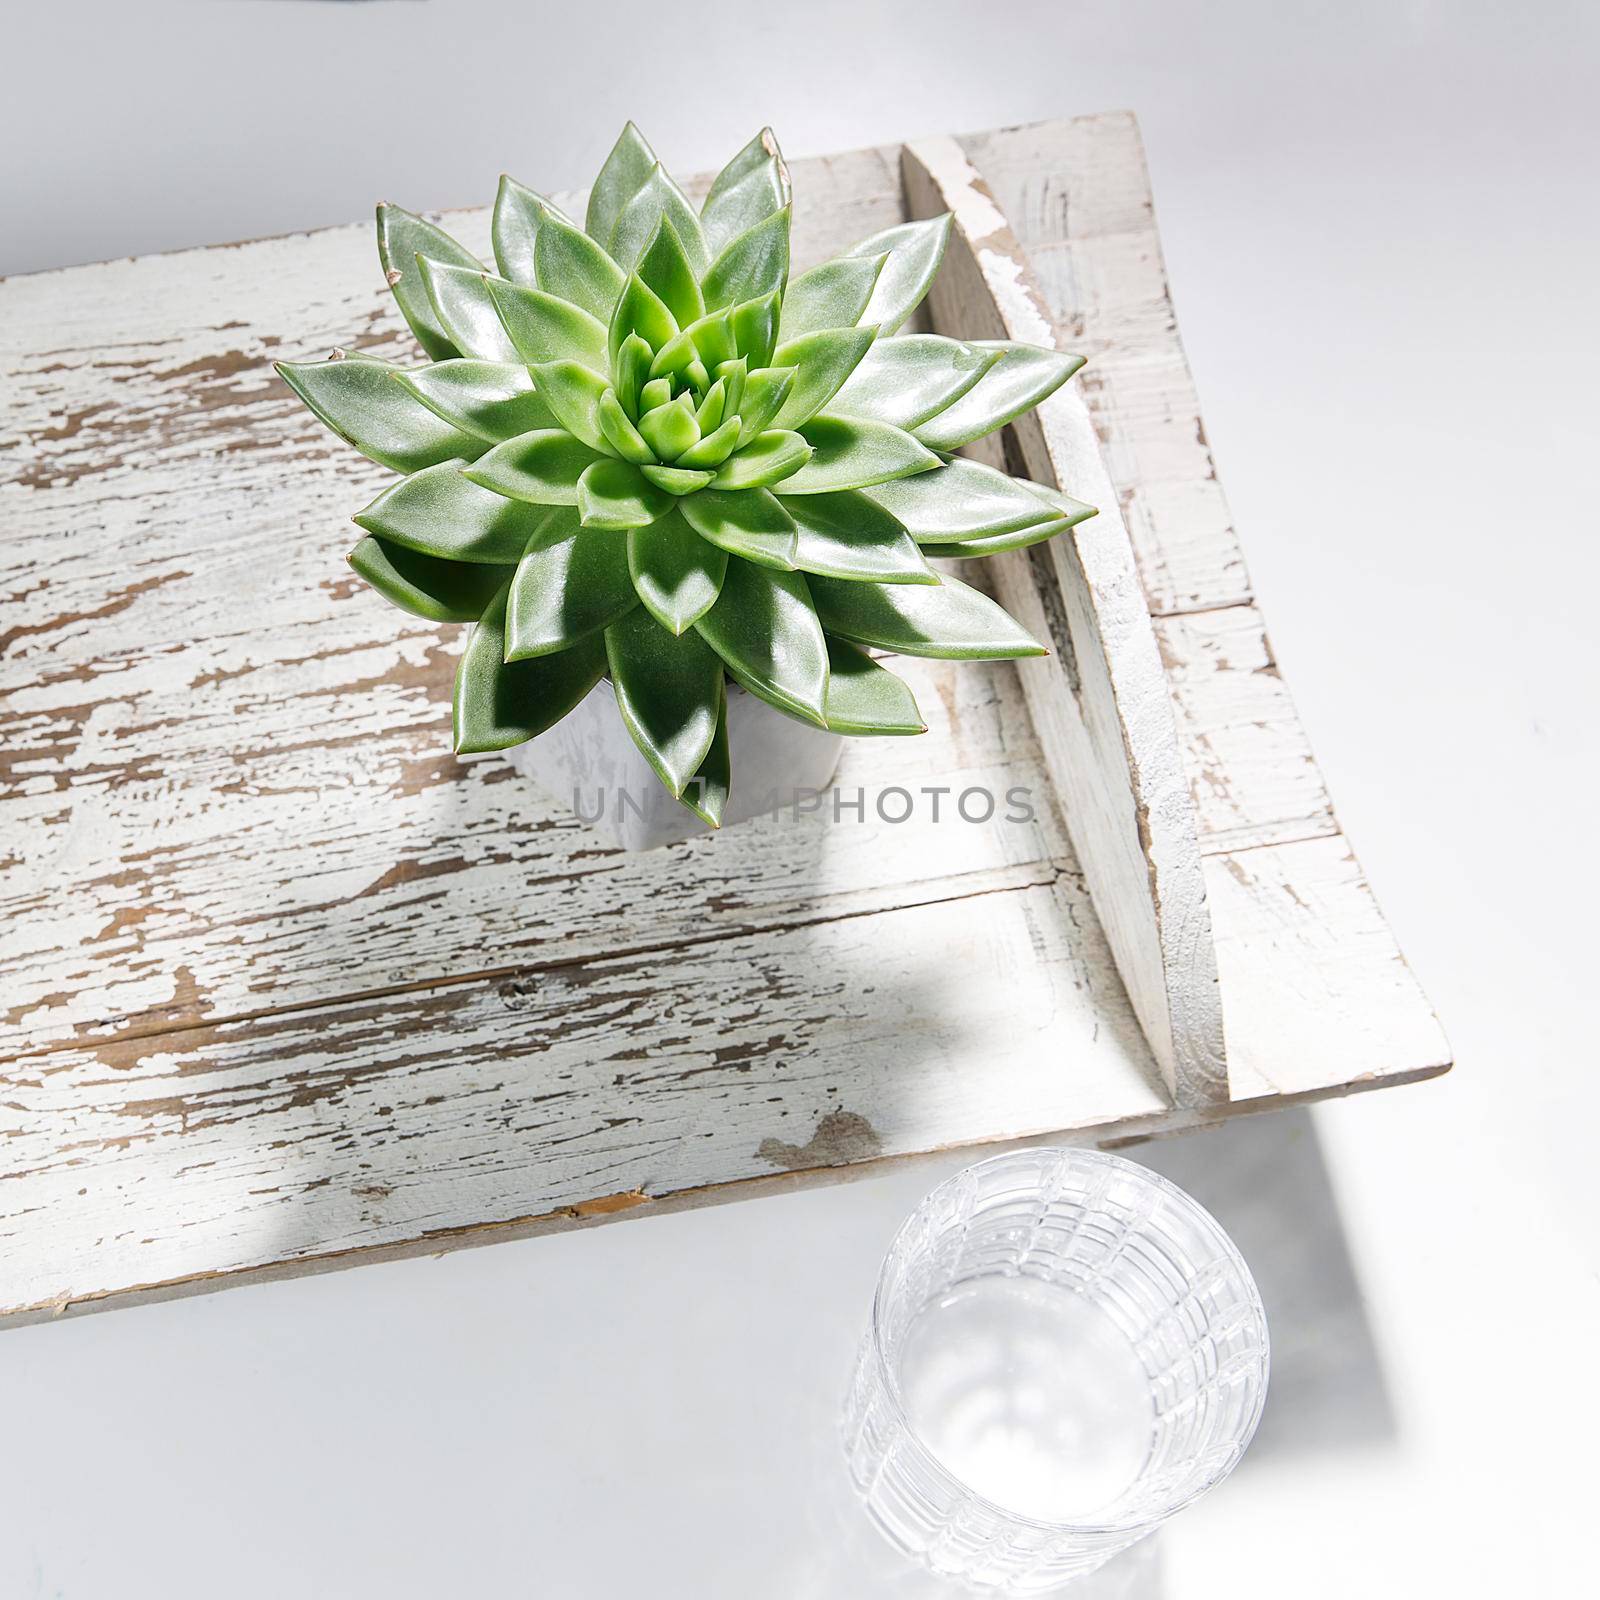 Echeveria plant in a gray ceramic pot on an old, vintage tray.